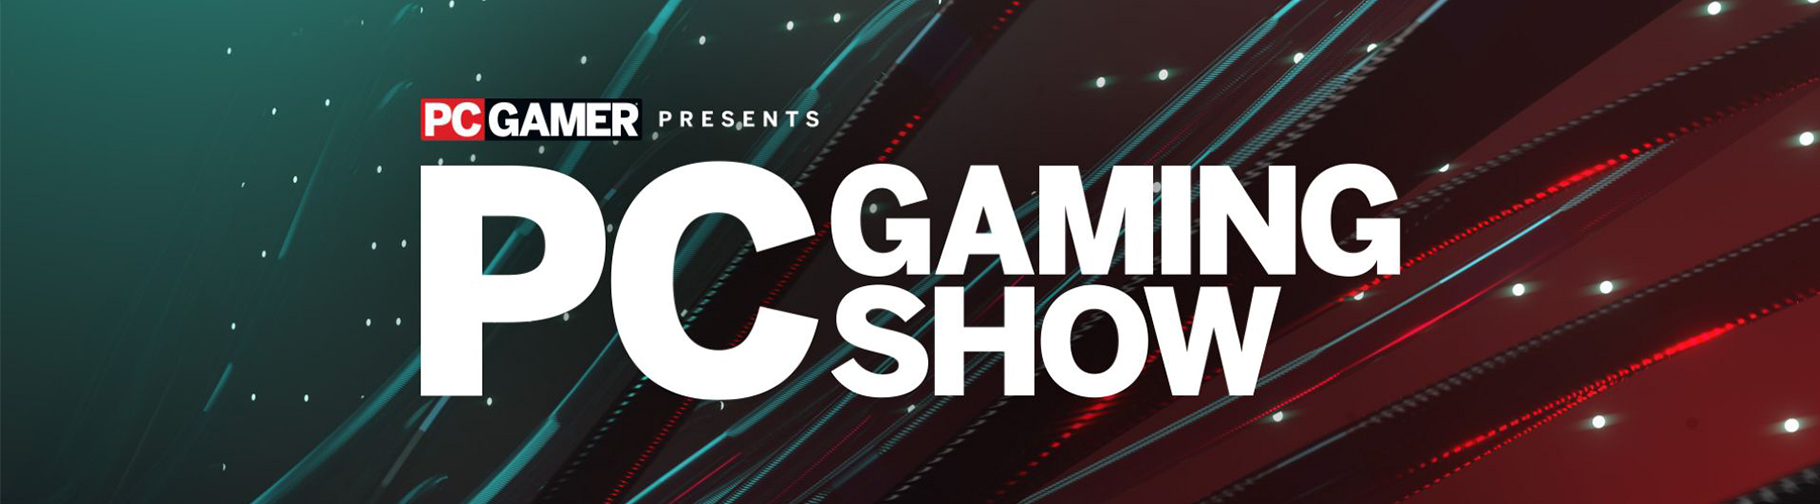 A PC Gaming Show marketing artwork that says "PCGamer Presents PC Gaming Show"